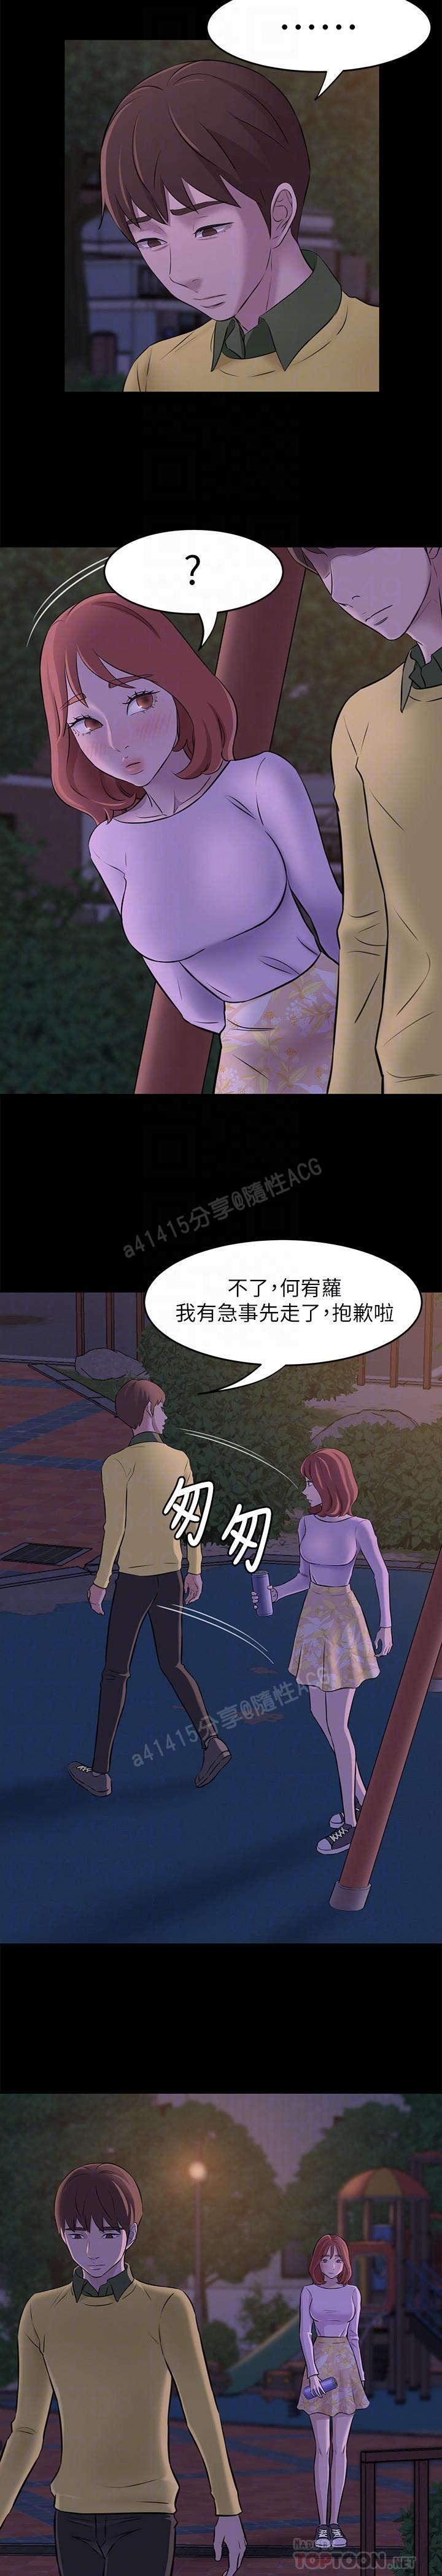 Climax panty note 小褲褲筆記 小裤裤笔记 01-35 连载中 Holes - Page 11